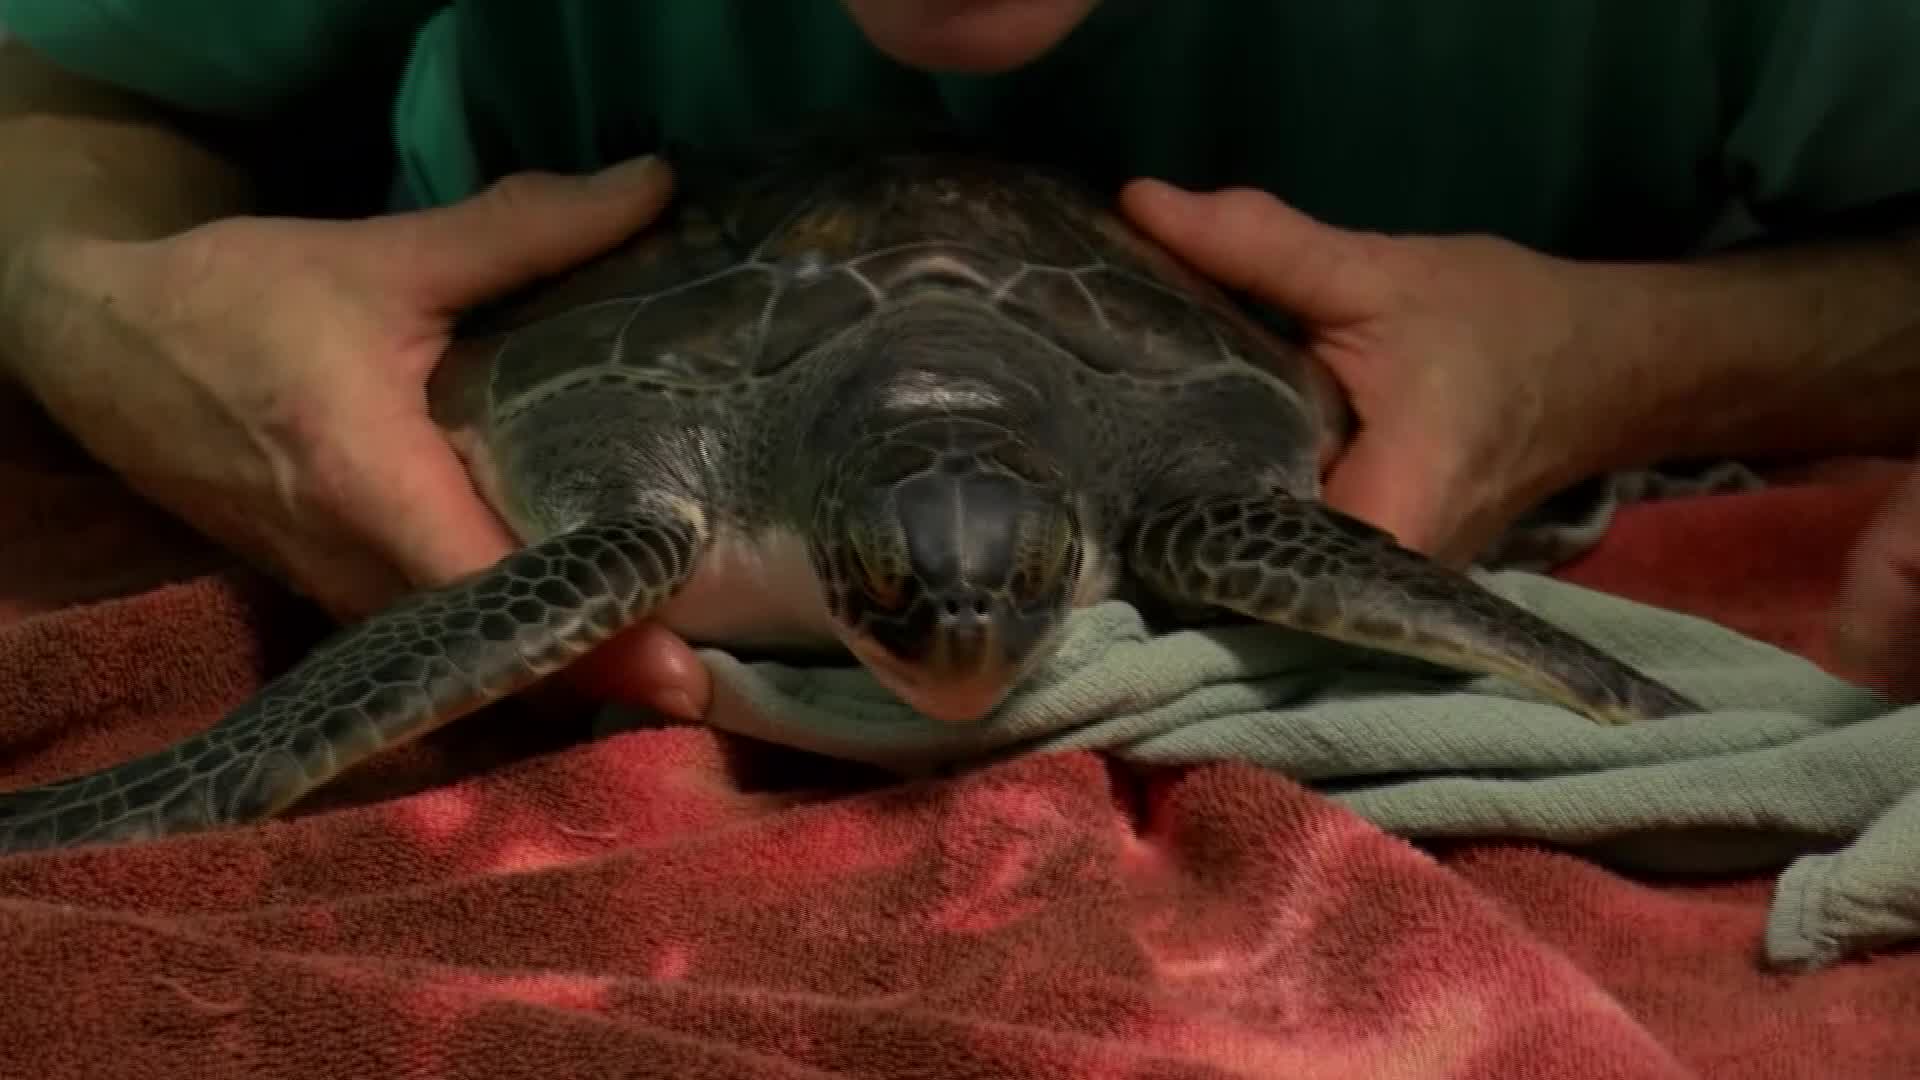 Thumbnail for the video titled "COLD STUNNED SEA TURTLES ADMITTED TO REHAB_CNN"